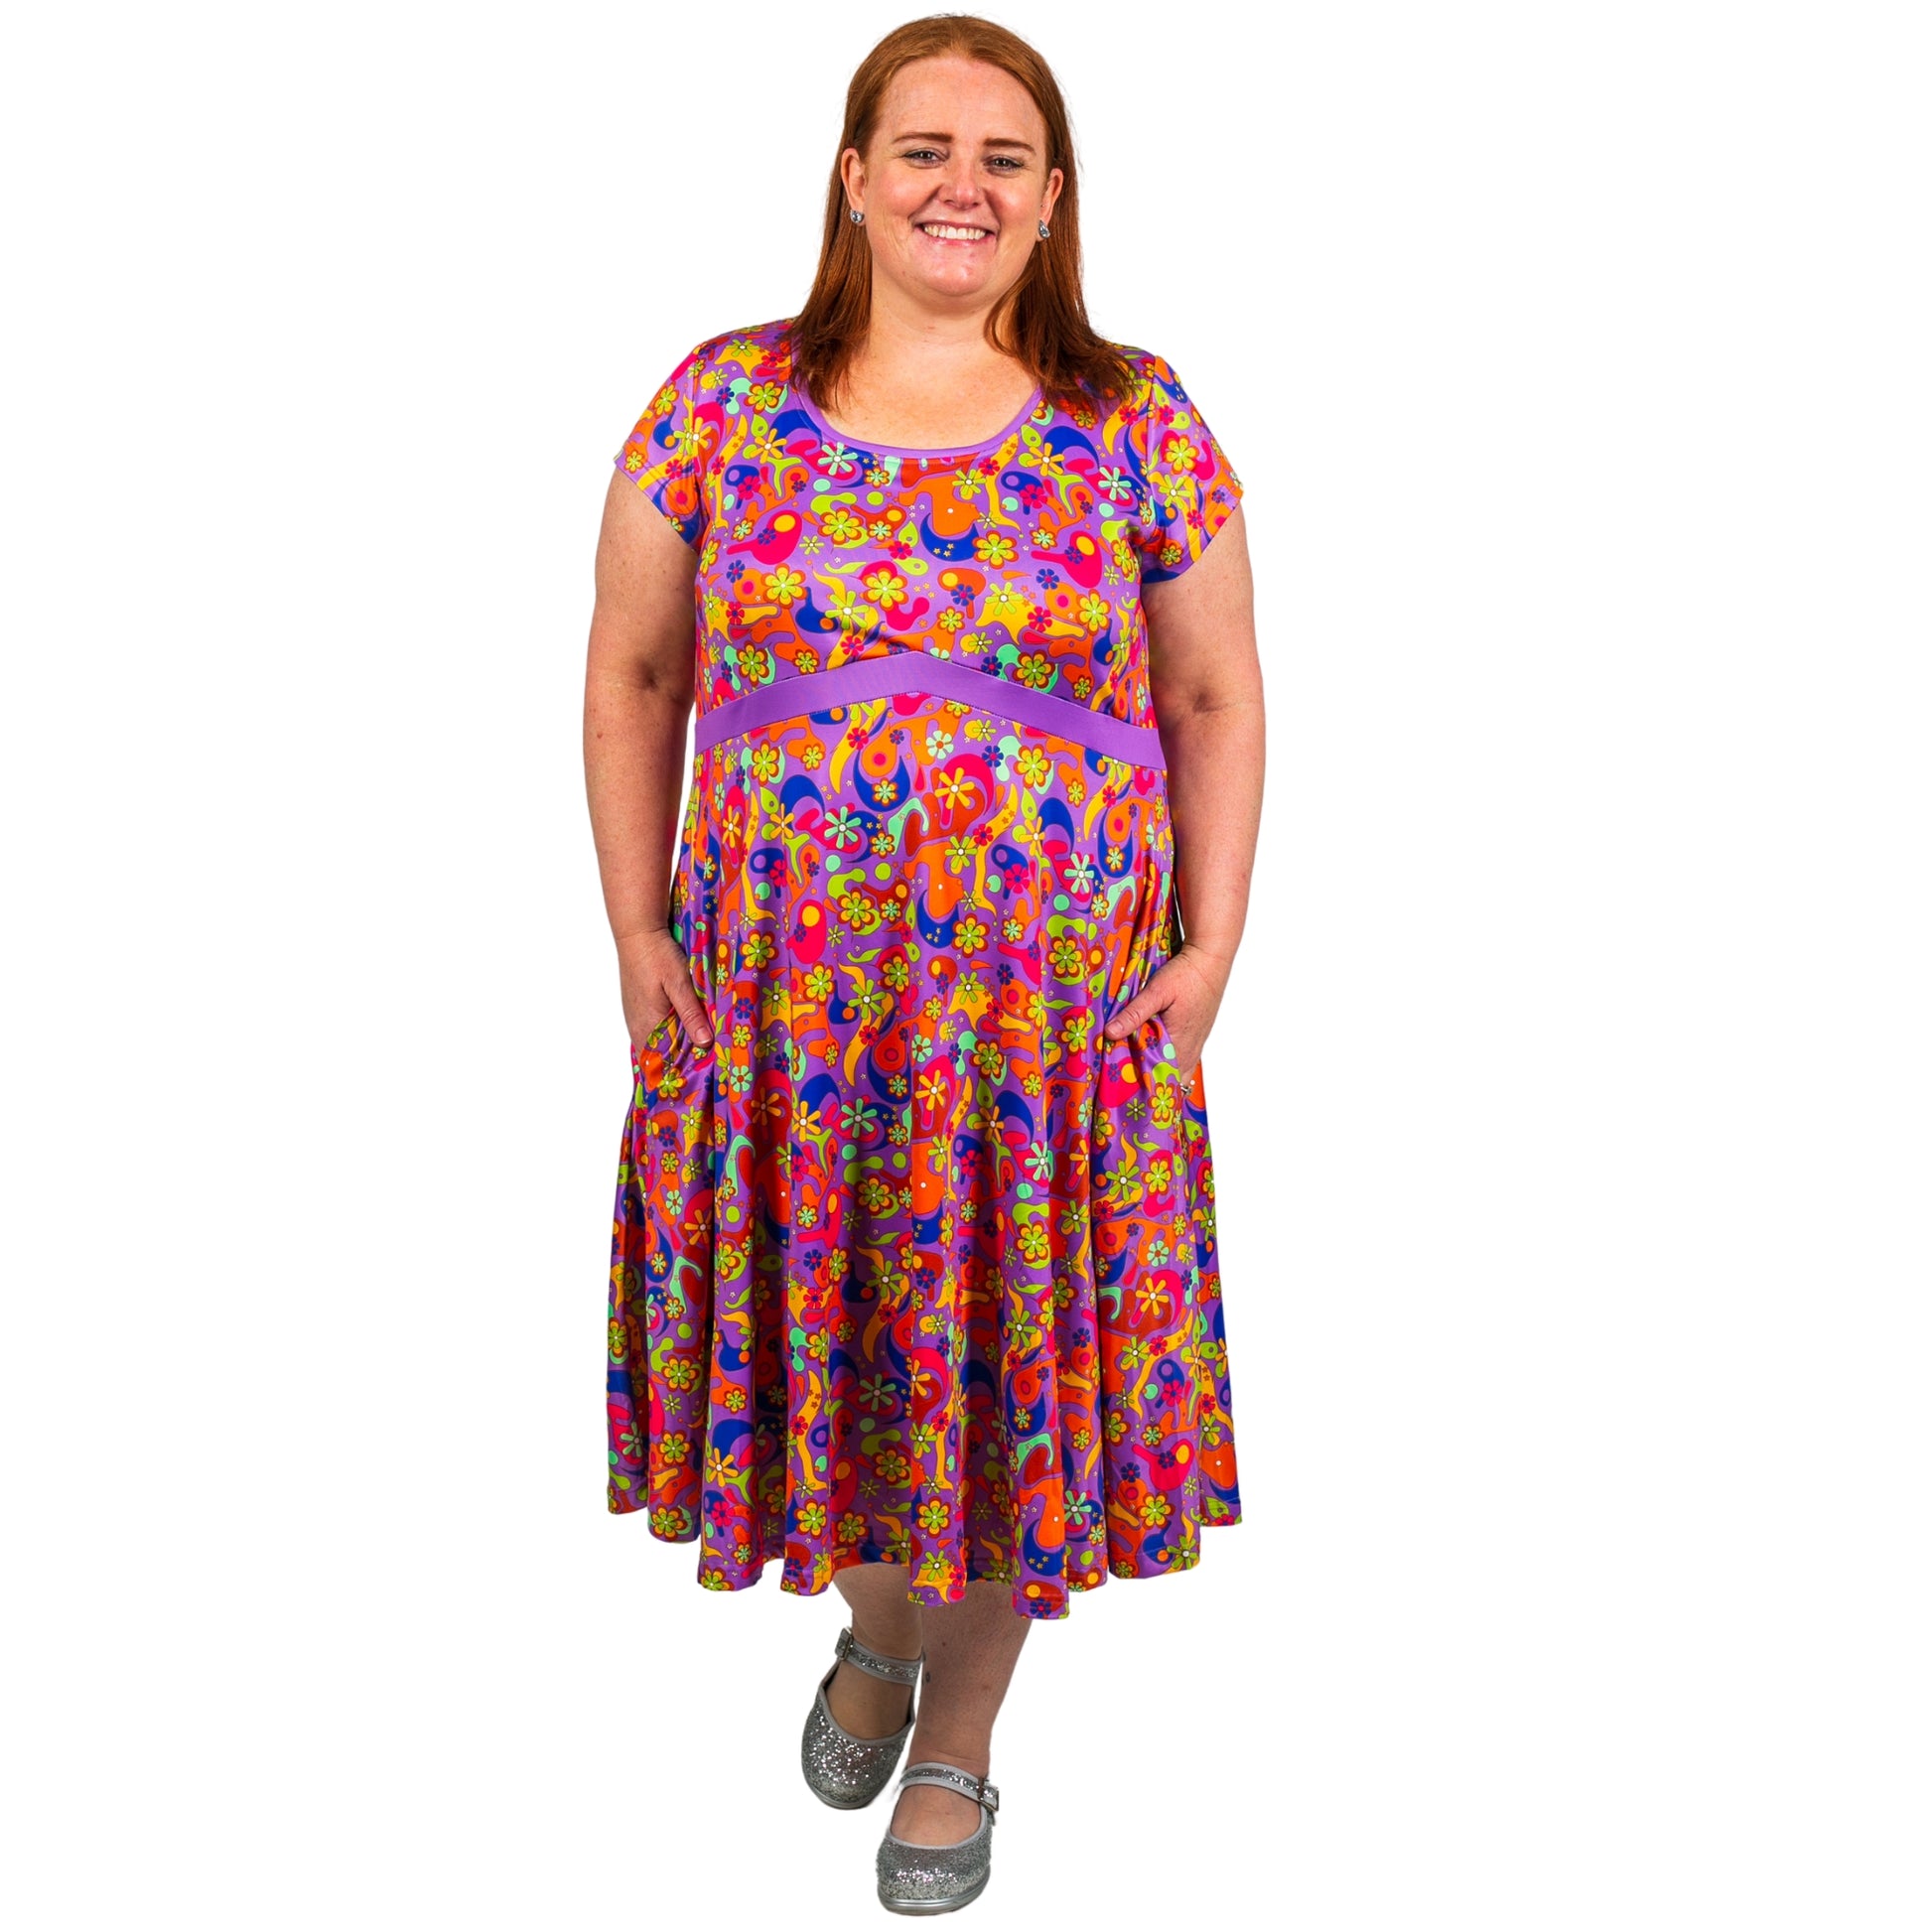 Flower Power Tea Dress by RainbowsAndFairies.com.au (Floral Print - Woodstock - Psychedelic - Dress With Pockets - Retro - Circle Skirt - Rockabilly) - SKU: CL_TEADR_FLOPO_ORG - Pic-01